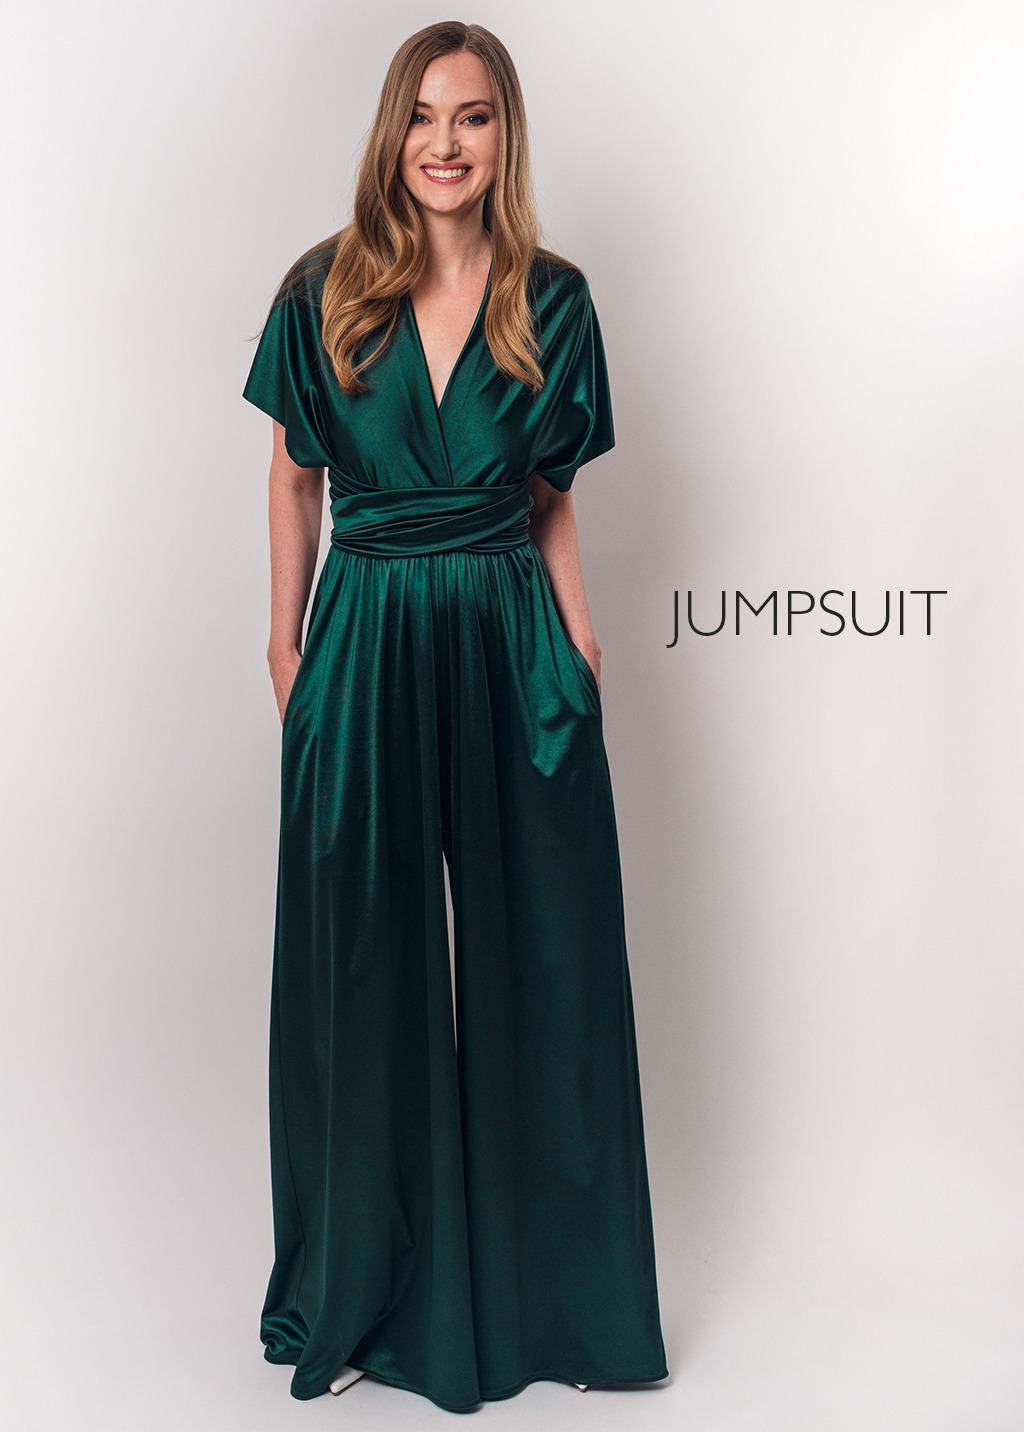 Olive green luxury satin infinity dress or jumpsuit